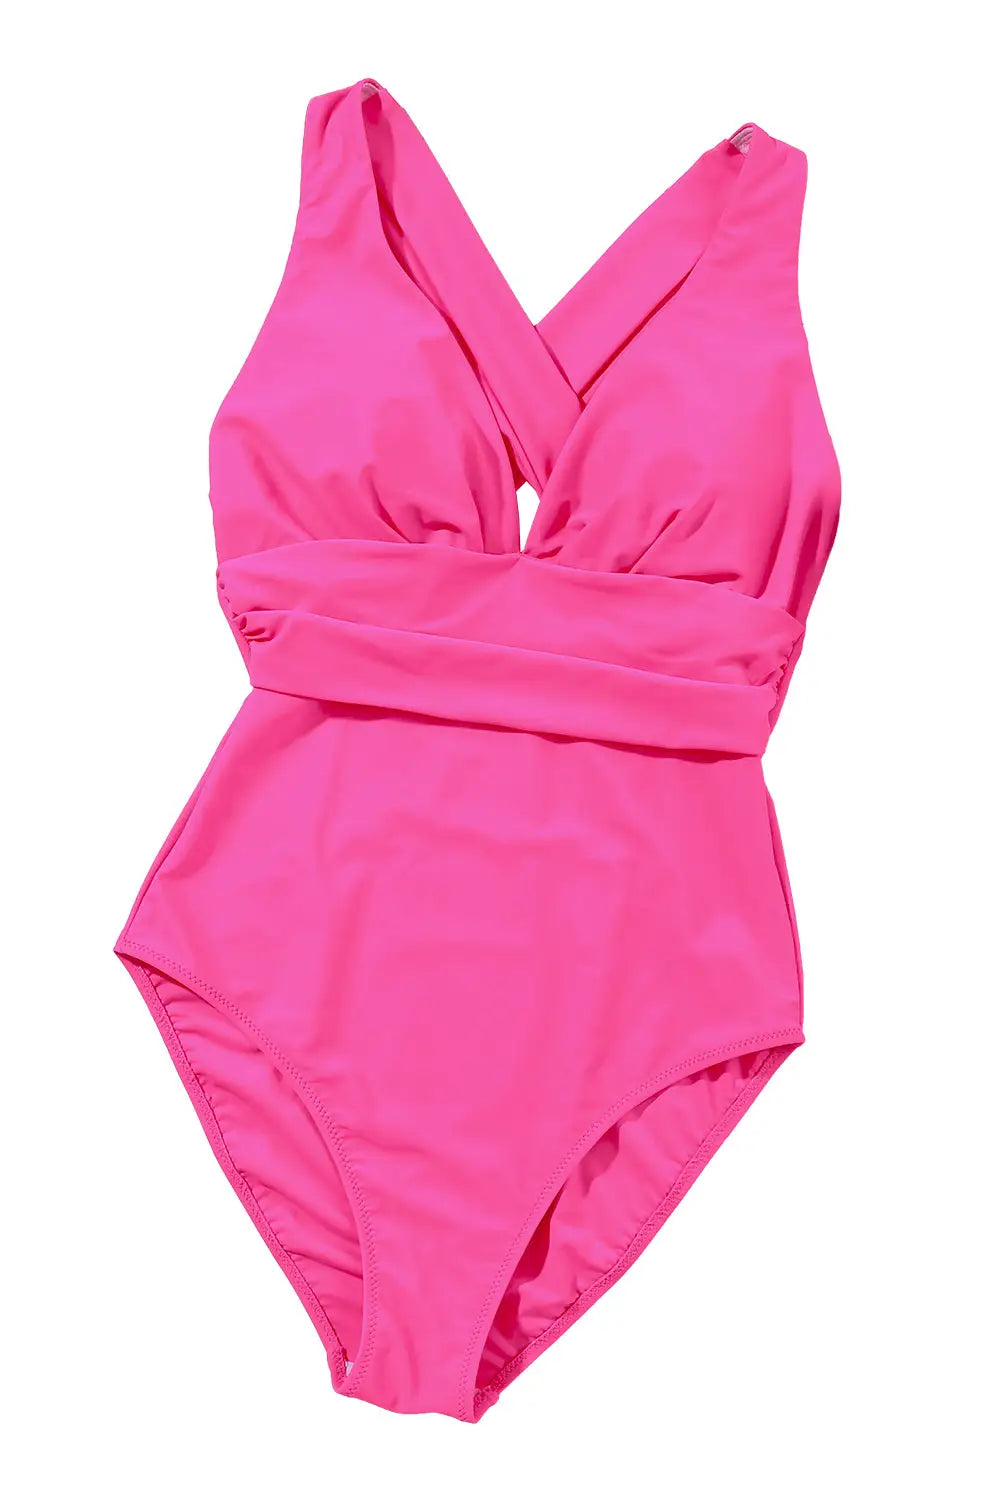 Rose red deep v neck crossover backless ruched high cut monokini - one piece swimsuits